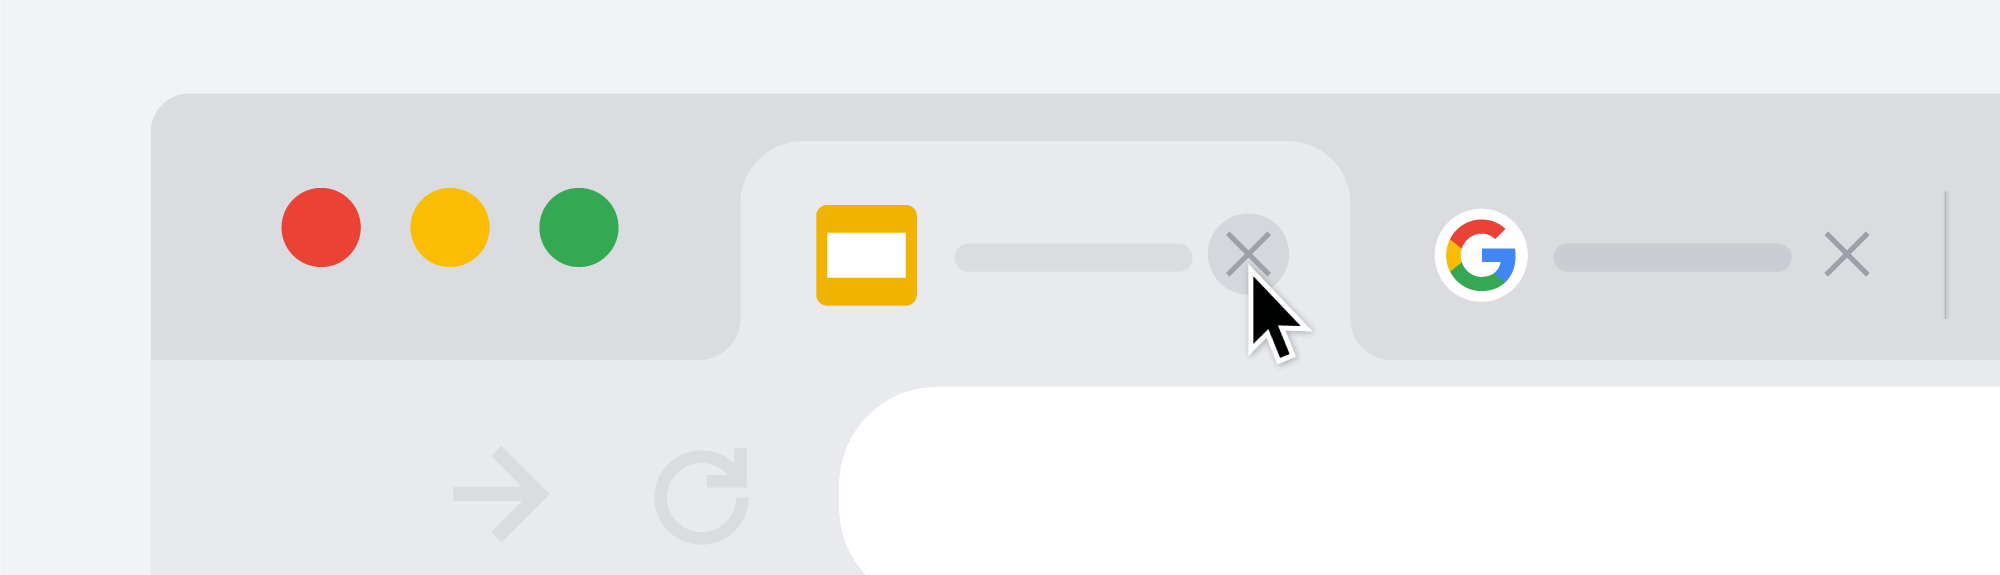 Illustrated GIF of a Chrome window flipping through different tabs.